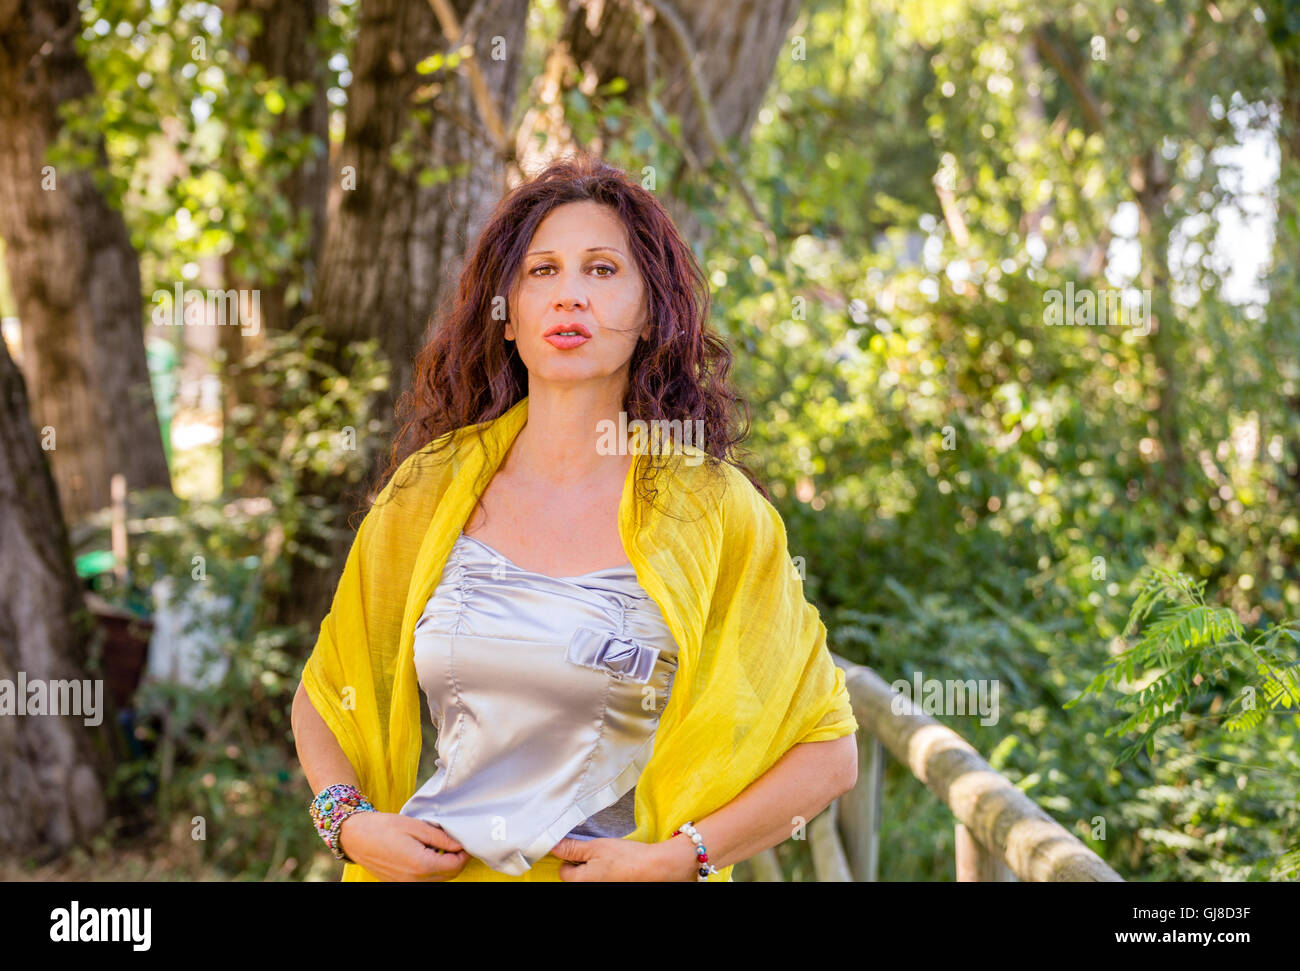 elegant and glamorous senior woman with yellow shawl and silver top is talking in a green park Stock Photo